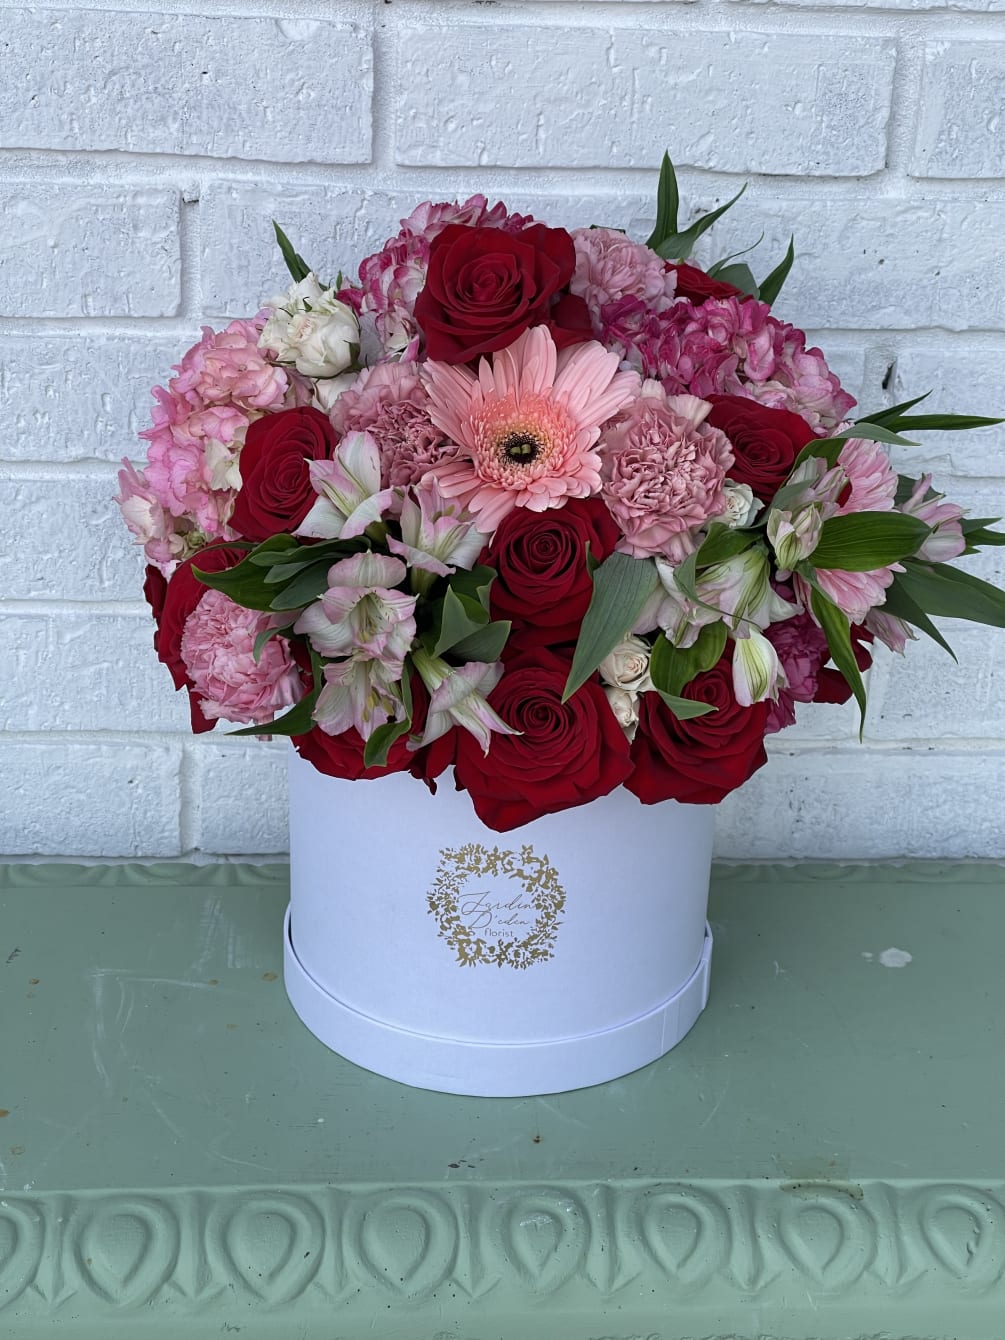 This beautiful box is filled with roses, carnations, hydrangeas, and a different